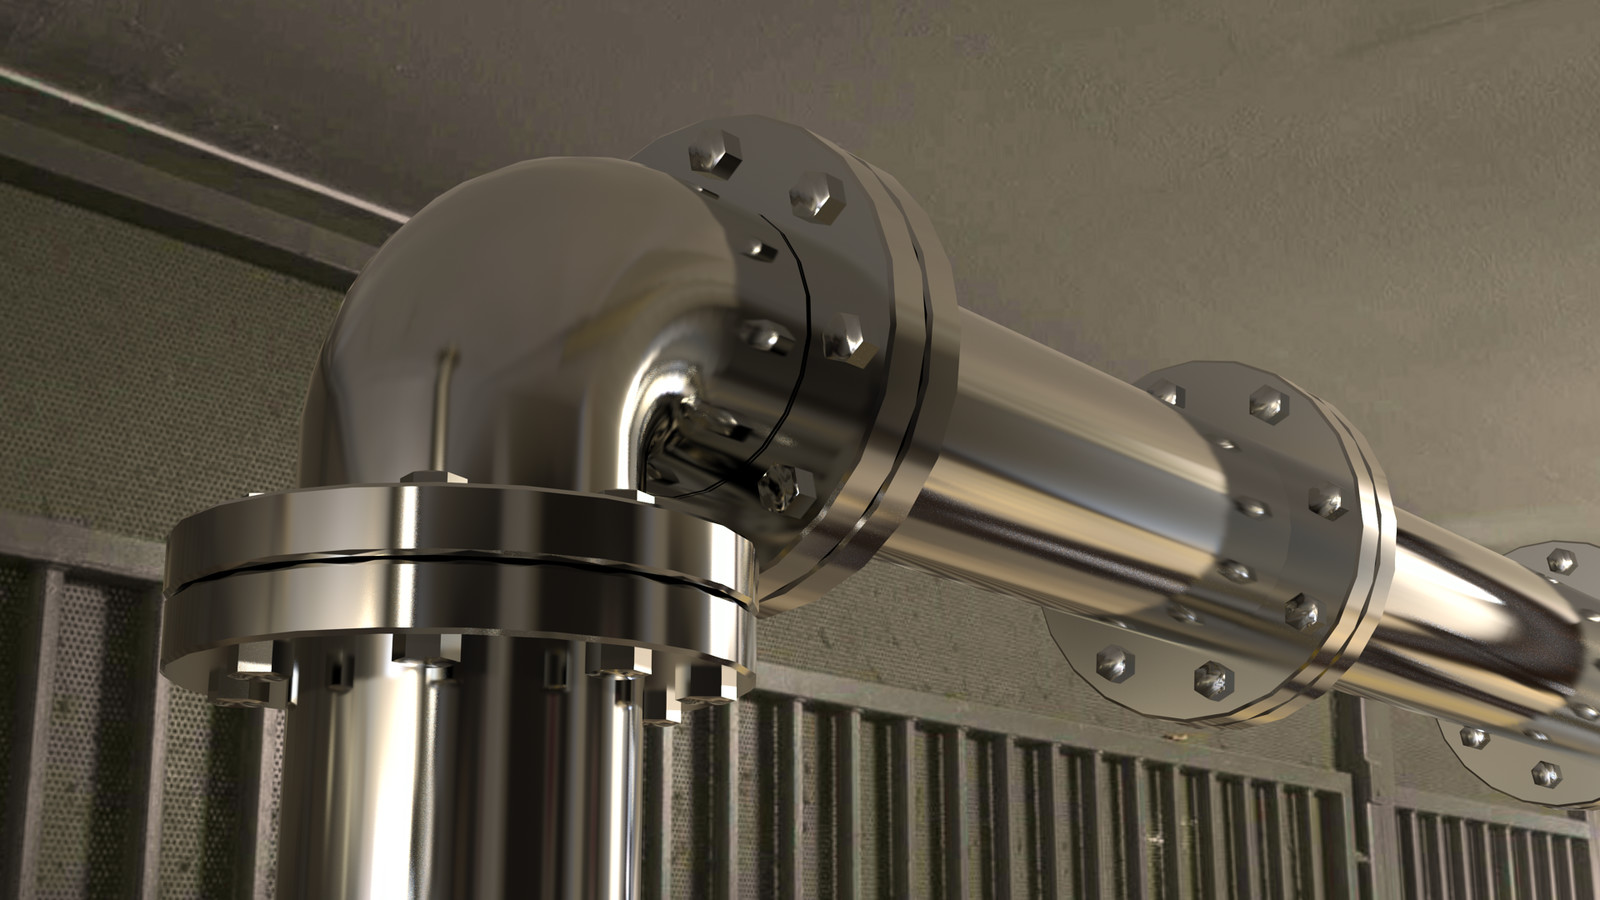 Stainless Steel and Chrome Plated Cast Iron Ventilation and Plumbing.

Made with Trimble SketchUp​ and Thea Render​